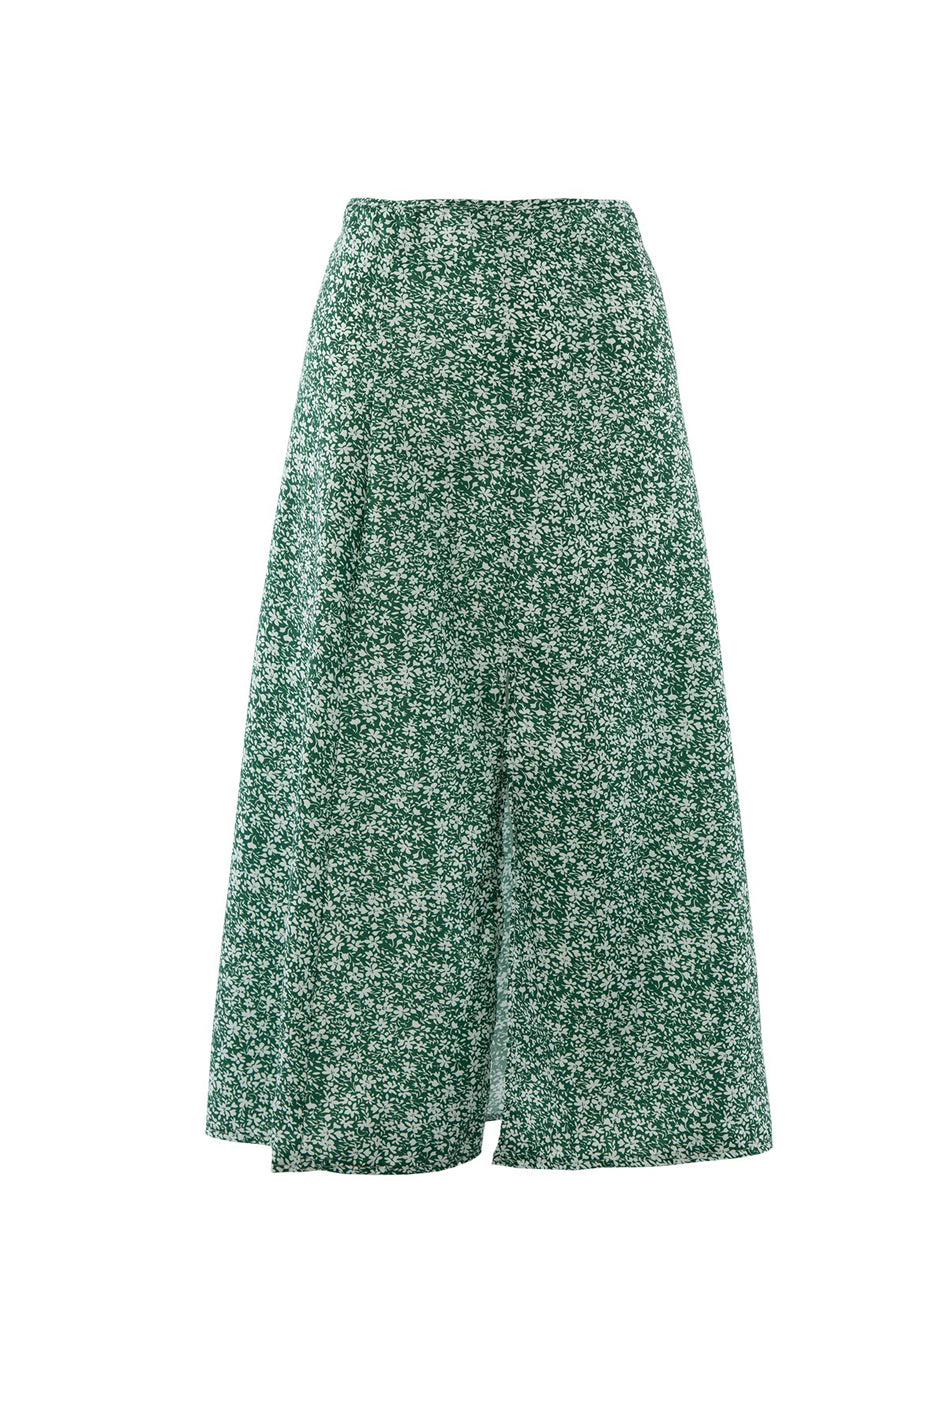 Floral midi skirt with slit - Azoroh